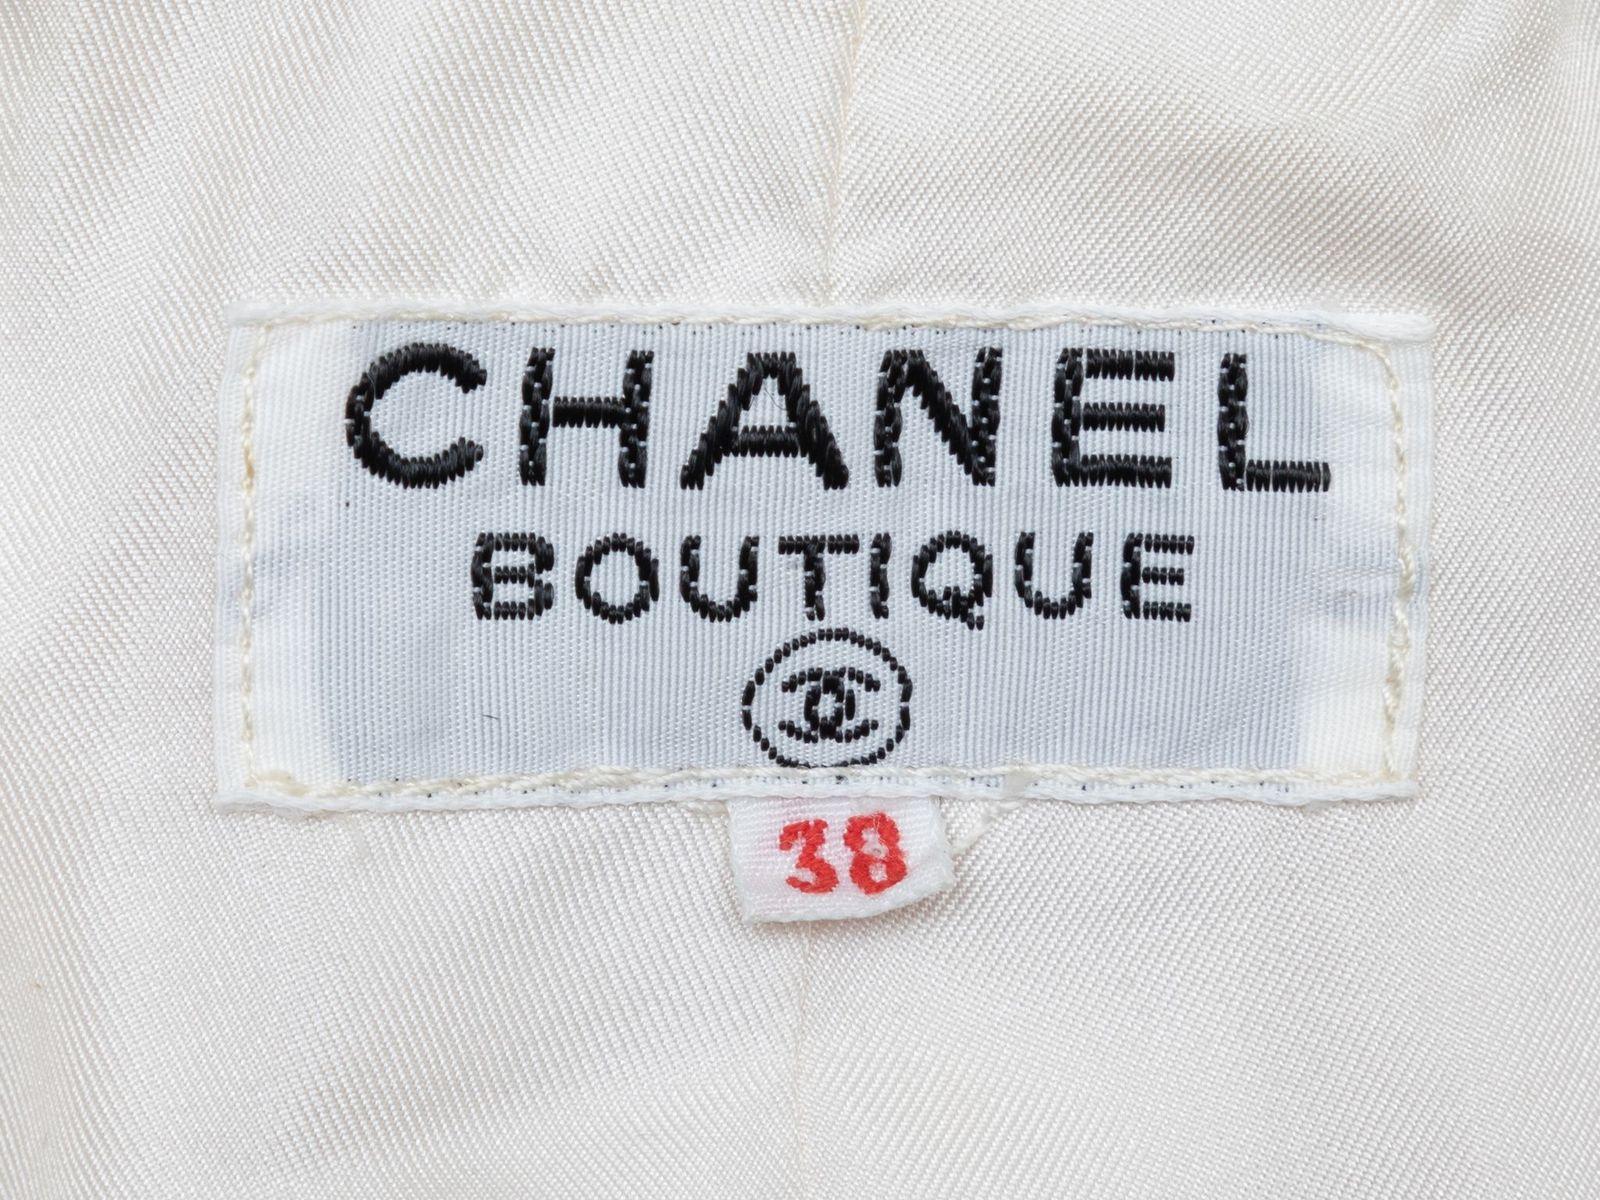 Product Details: Vintage ivory boucle tweed jacket by Chanel. Gold-tone hardware. Dual hip pockets. Open front. Designer size 38. 34